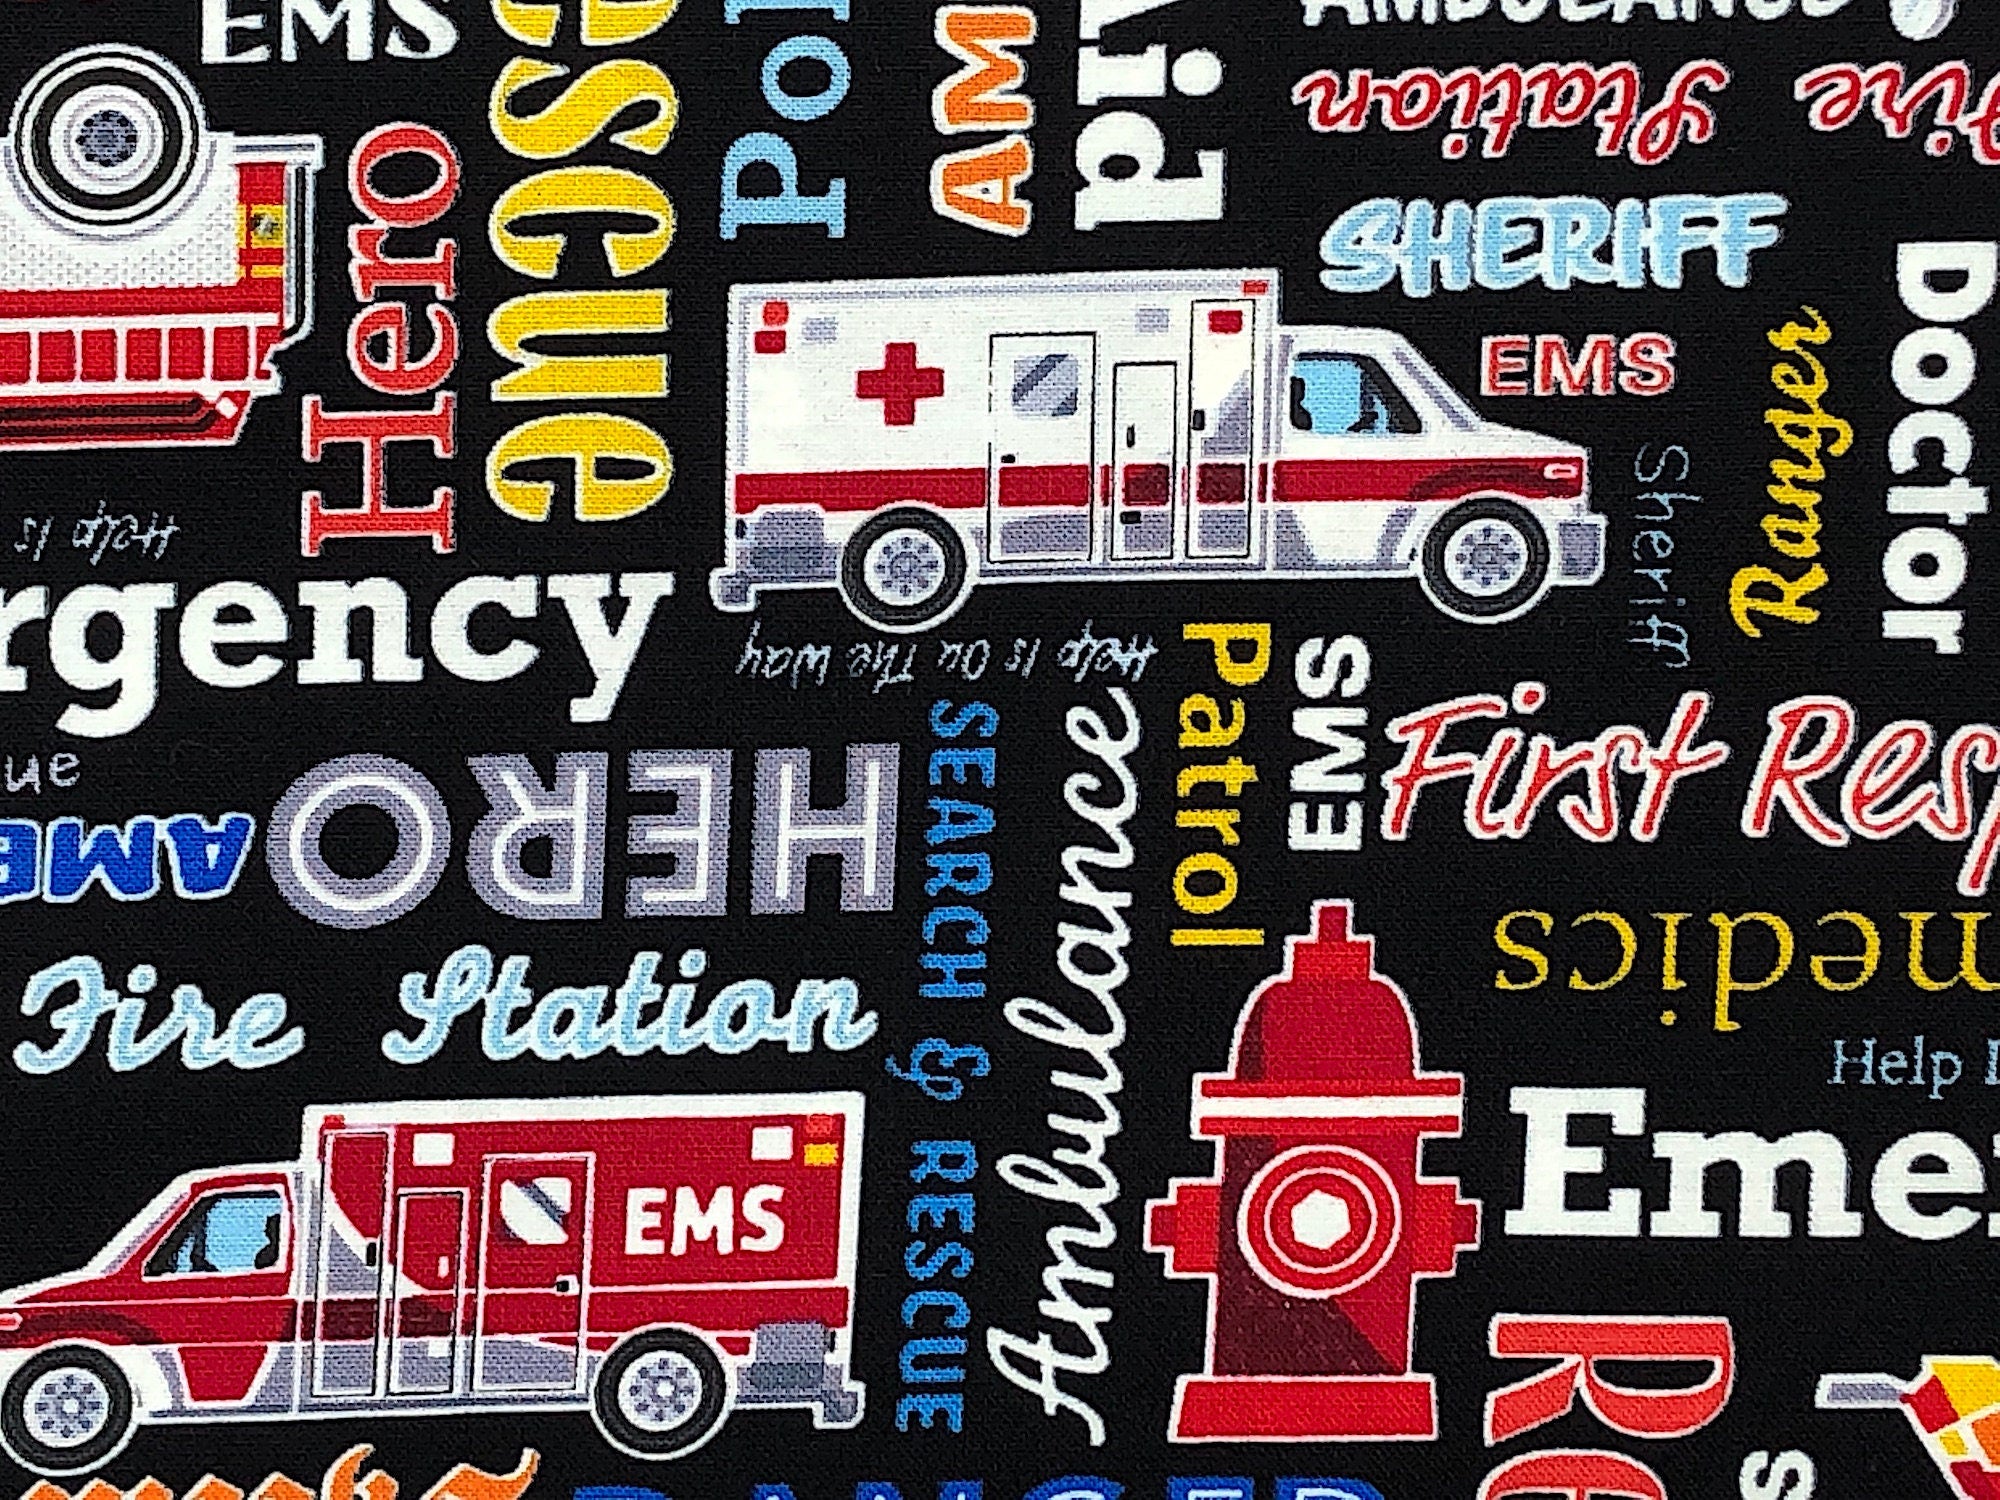 Close up of an ambulance, fire hydrant and ems truck.